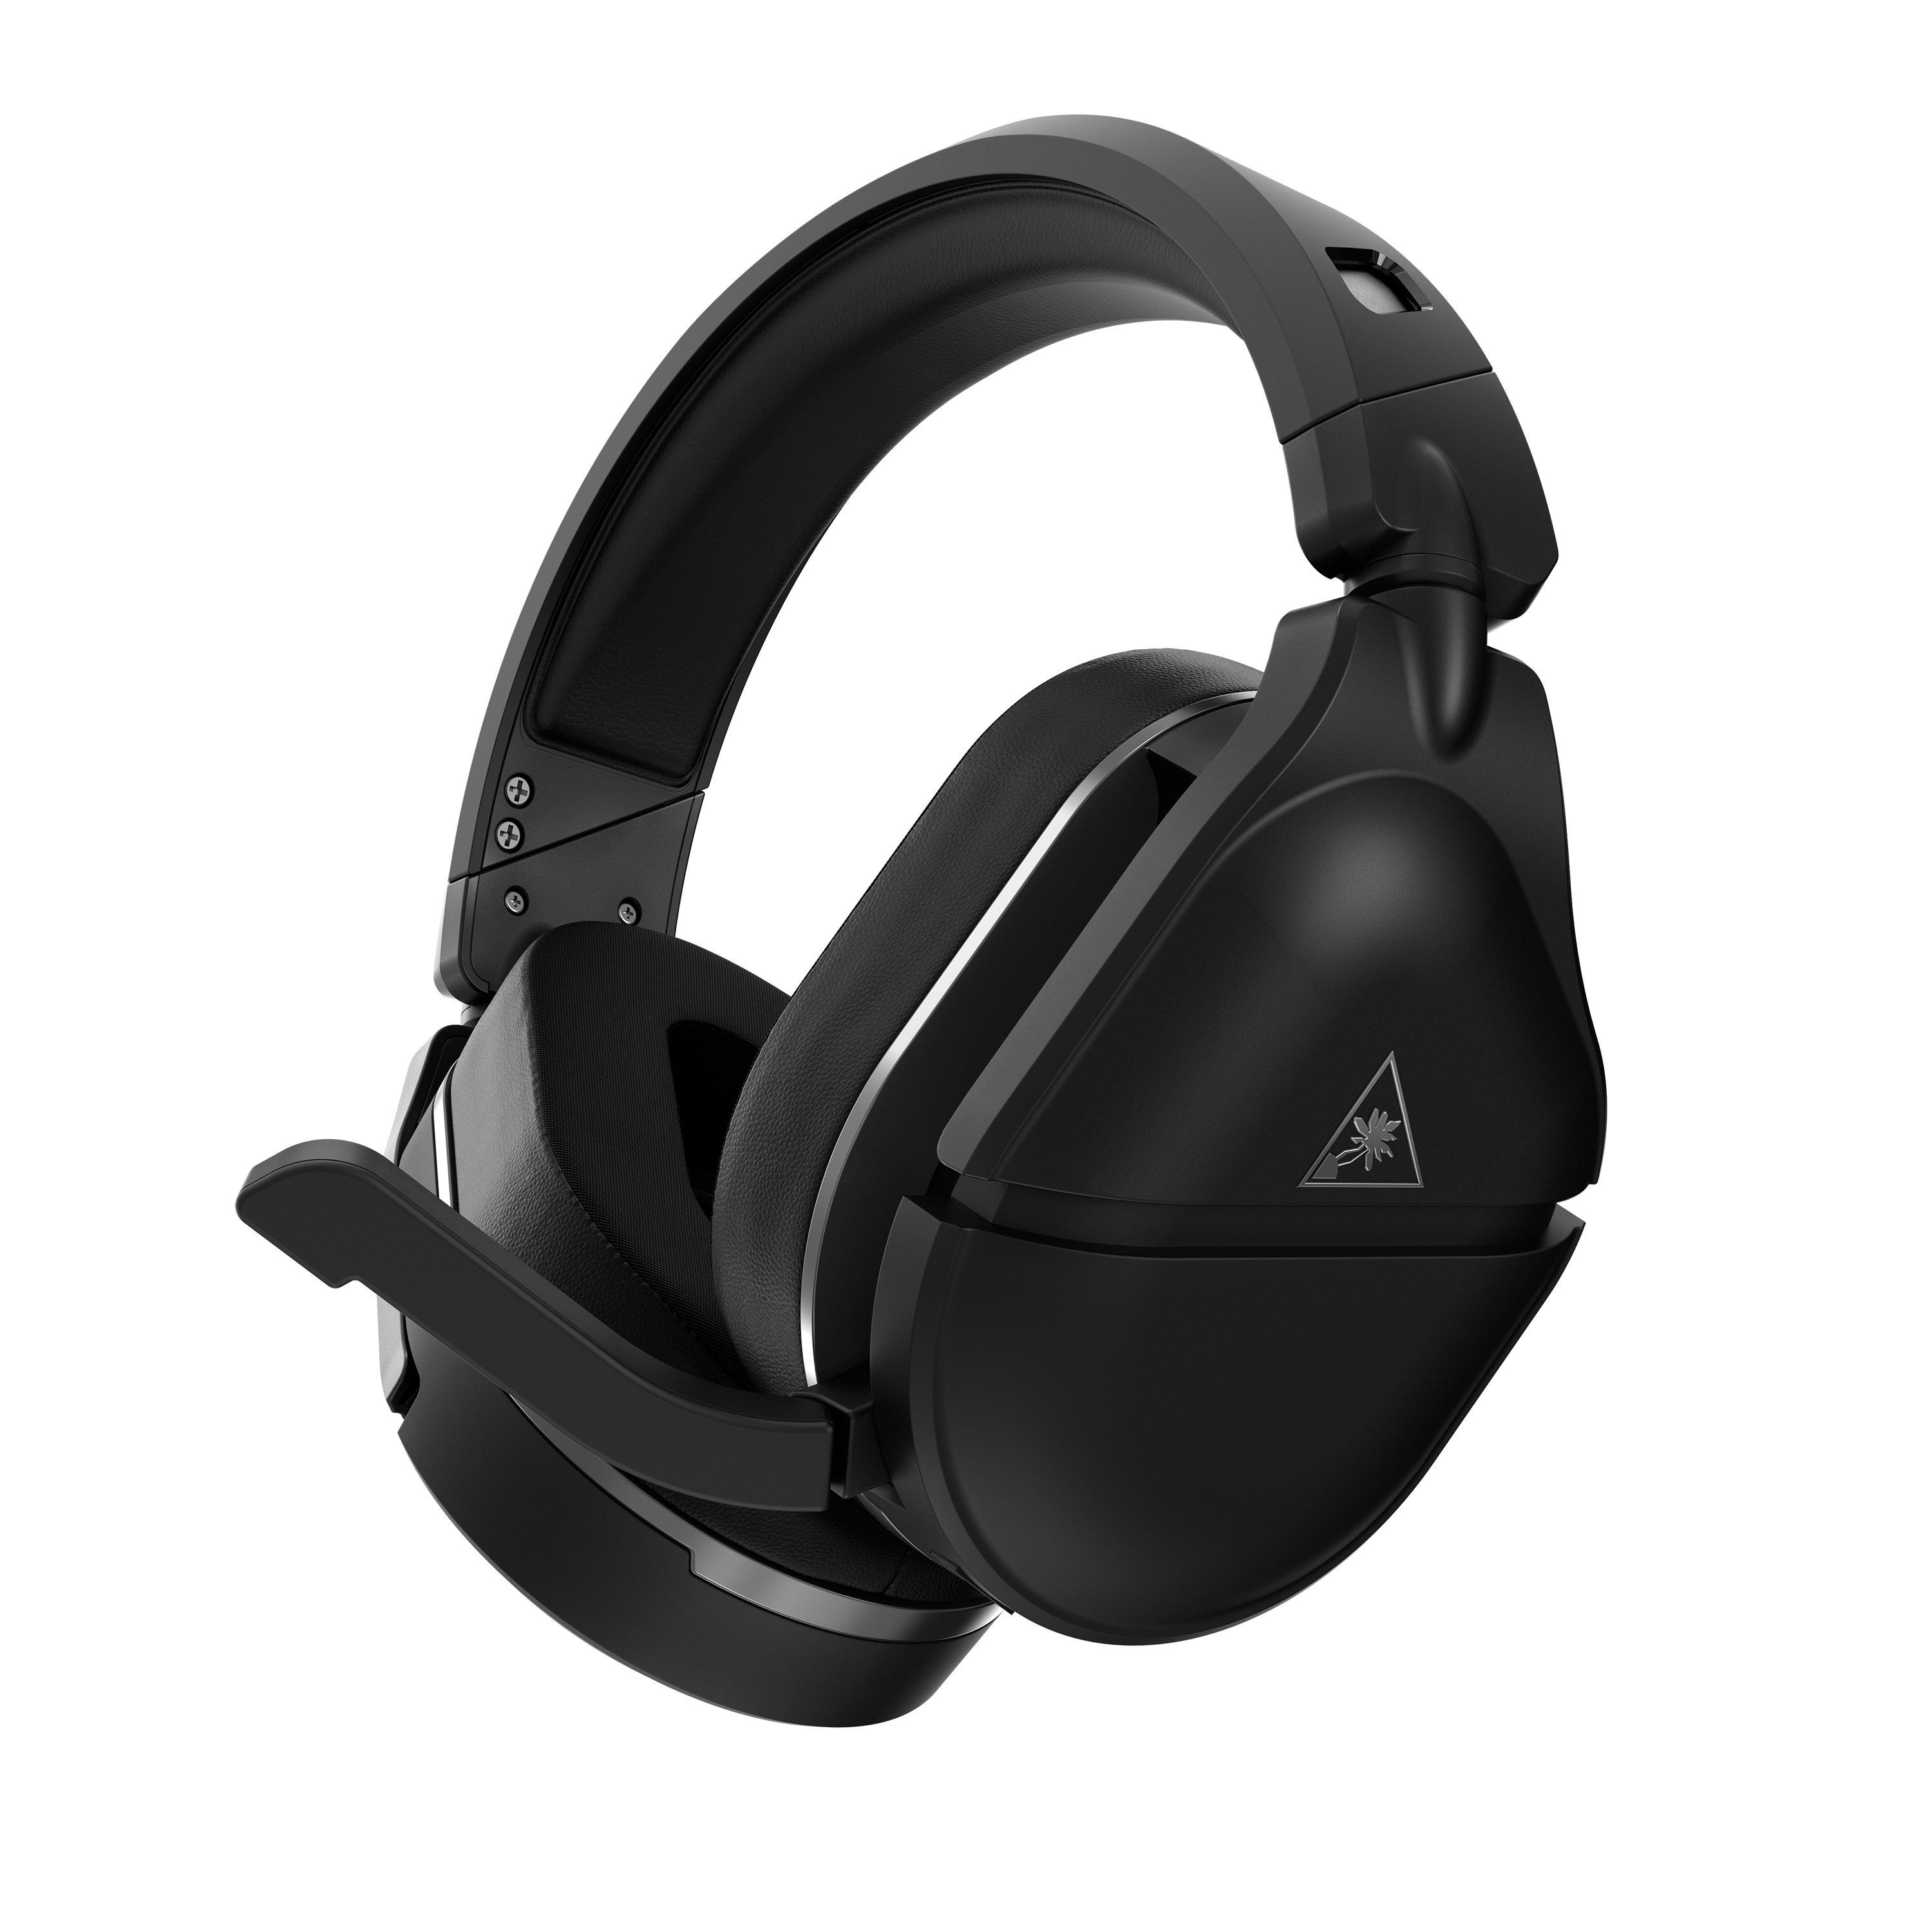 Turtle Beach Stealth Pro gaming headset review